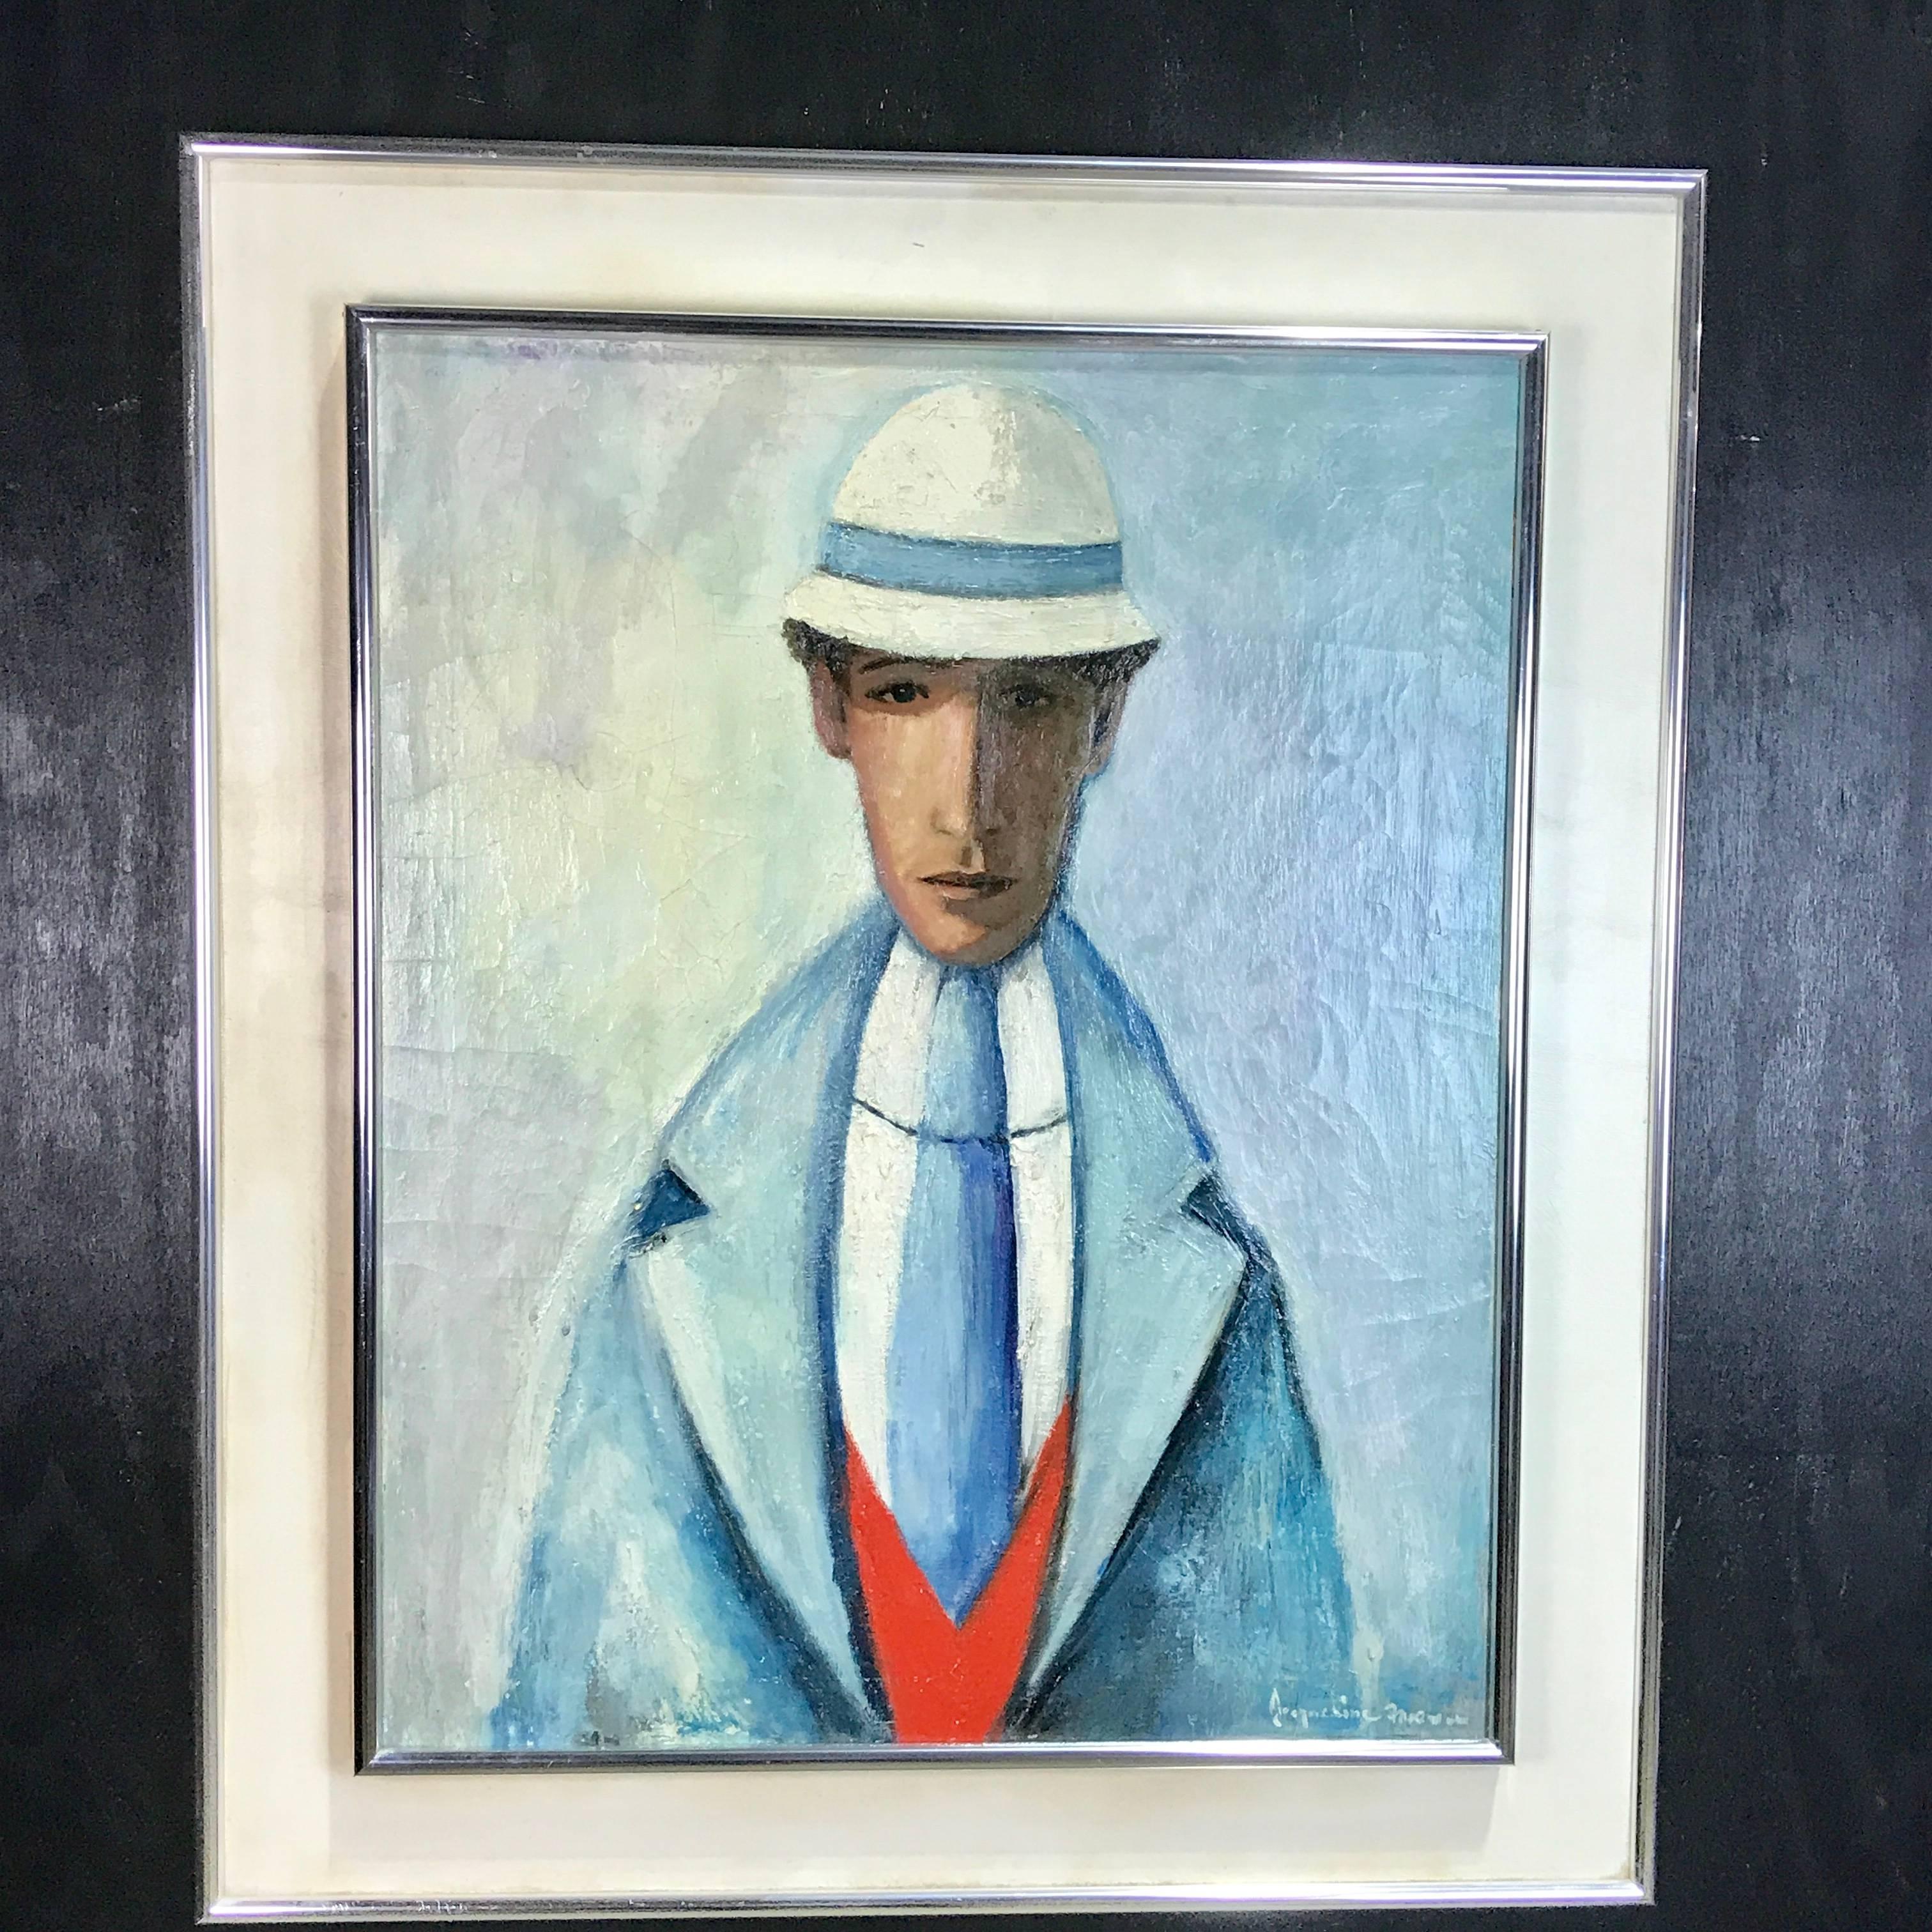 French Midcentury Portrait of a Man by Jacqueline Fromenteau 2